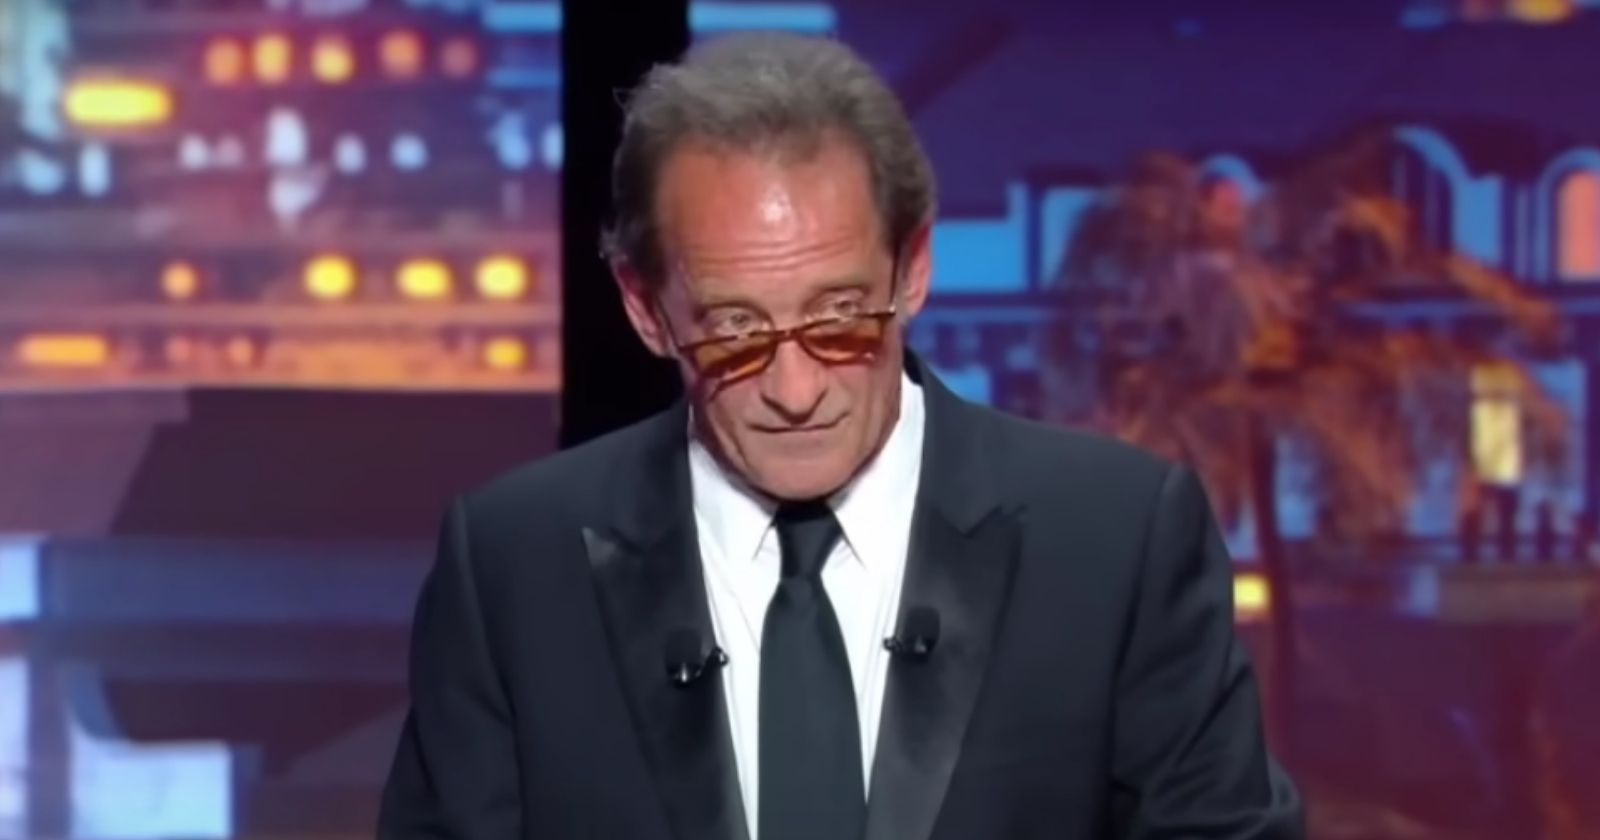 VIDEO.  “To be alive and to know it”: Vincent Lindon's intense and dedicated speech at Cannes